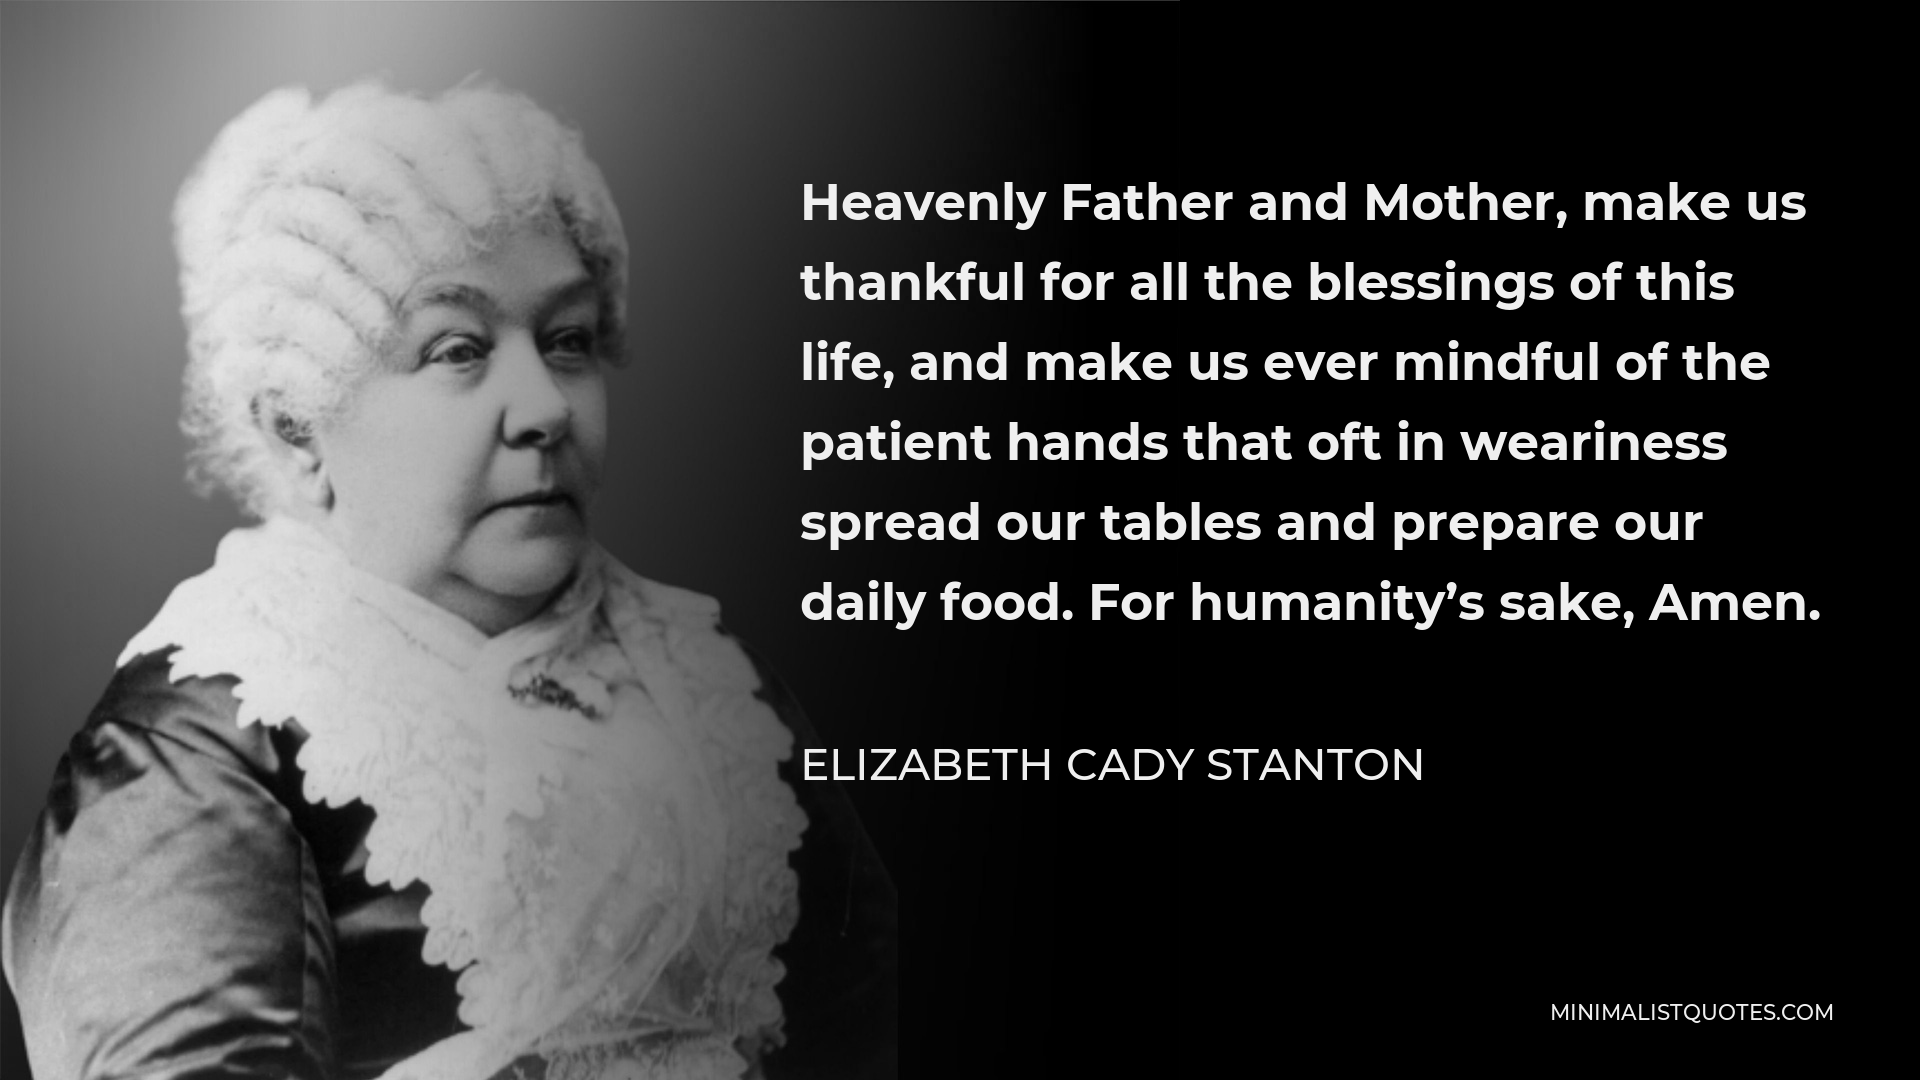 Elizabeth Cady Stanton Quote - Heavenly Father and Mother, make us thankful for all the blessings of this life, and make us ever mindful of the patient hands that oft in weariness spread our tables and prepare our daily food. For humanity’s sake, Amen.